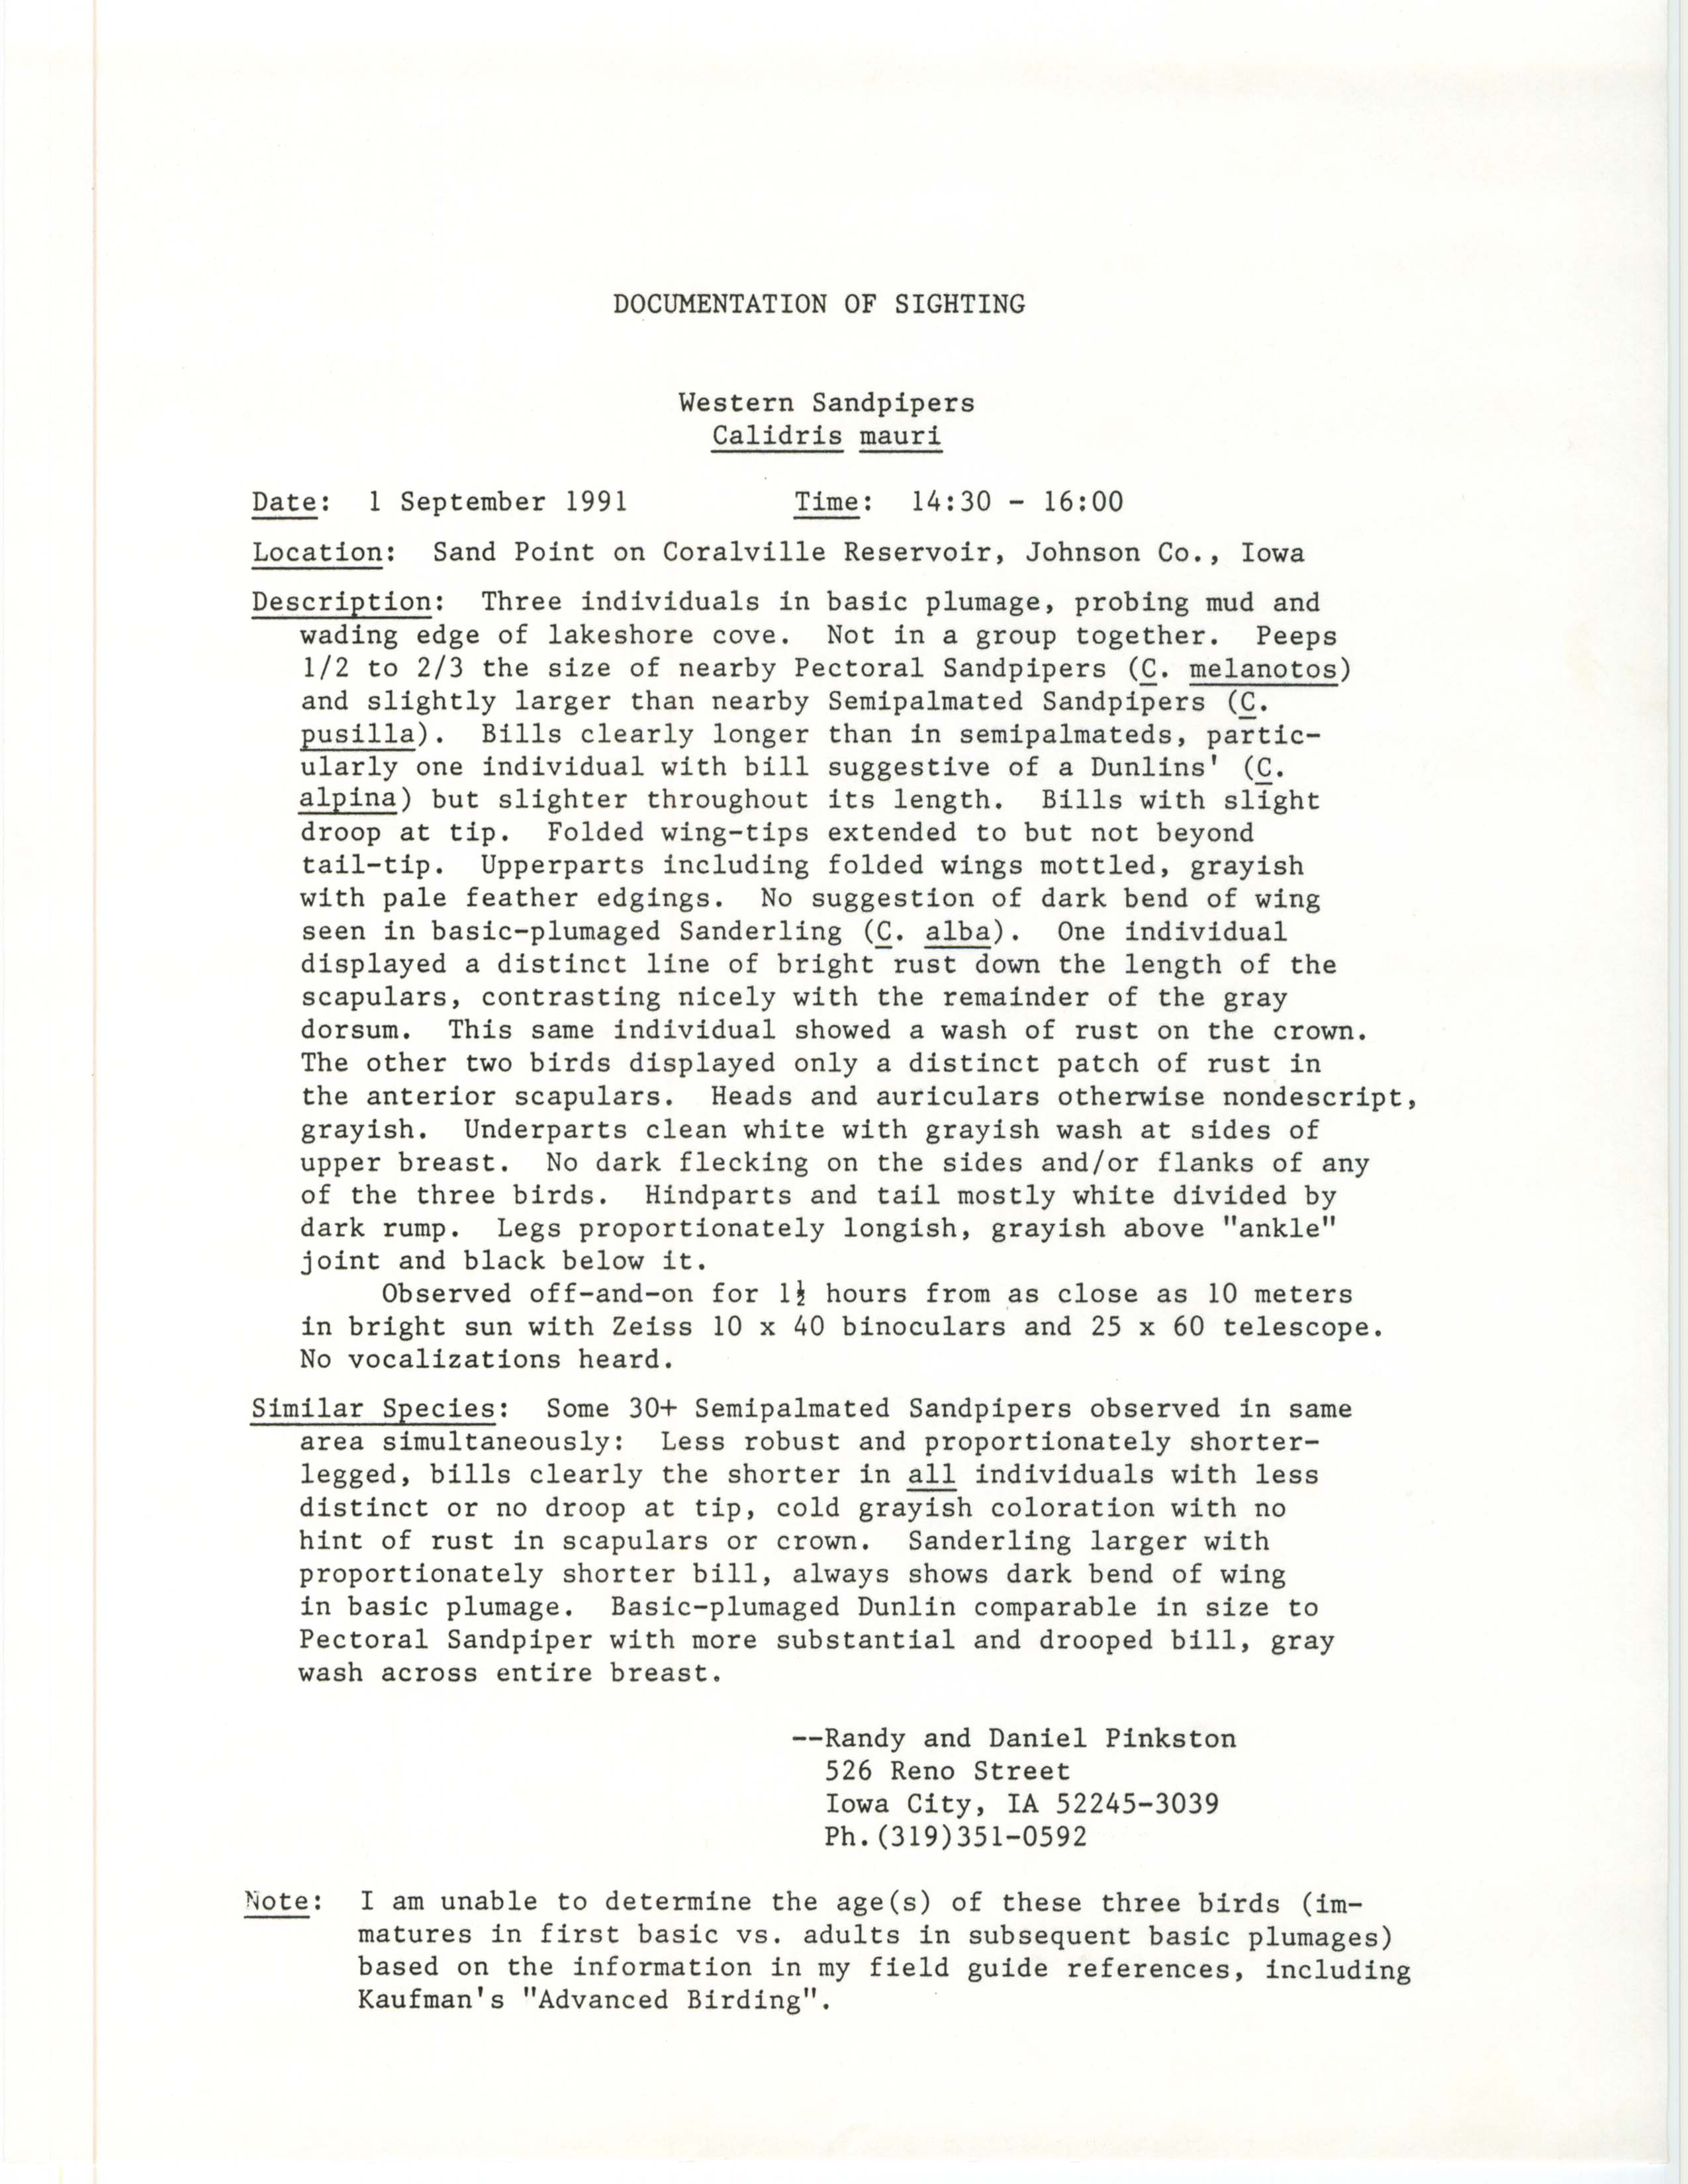 Rare bird documentation form for Western Sandpiper at Sand Point in Coralville Reservoir, 1991